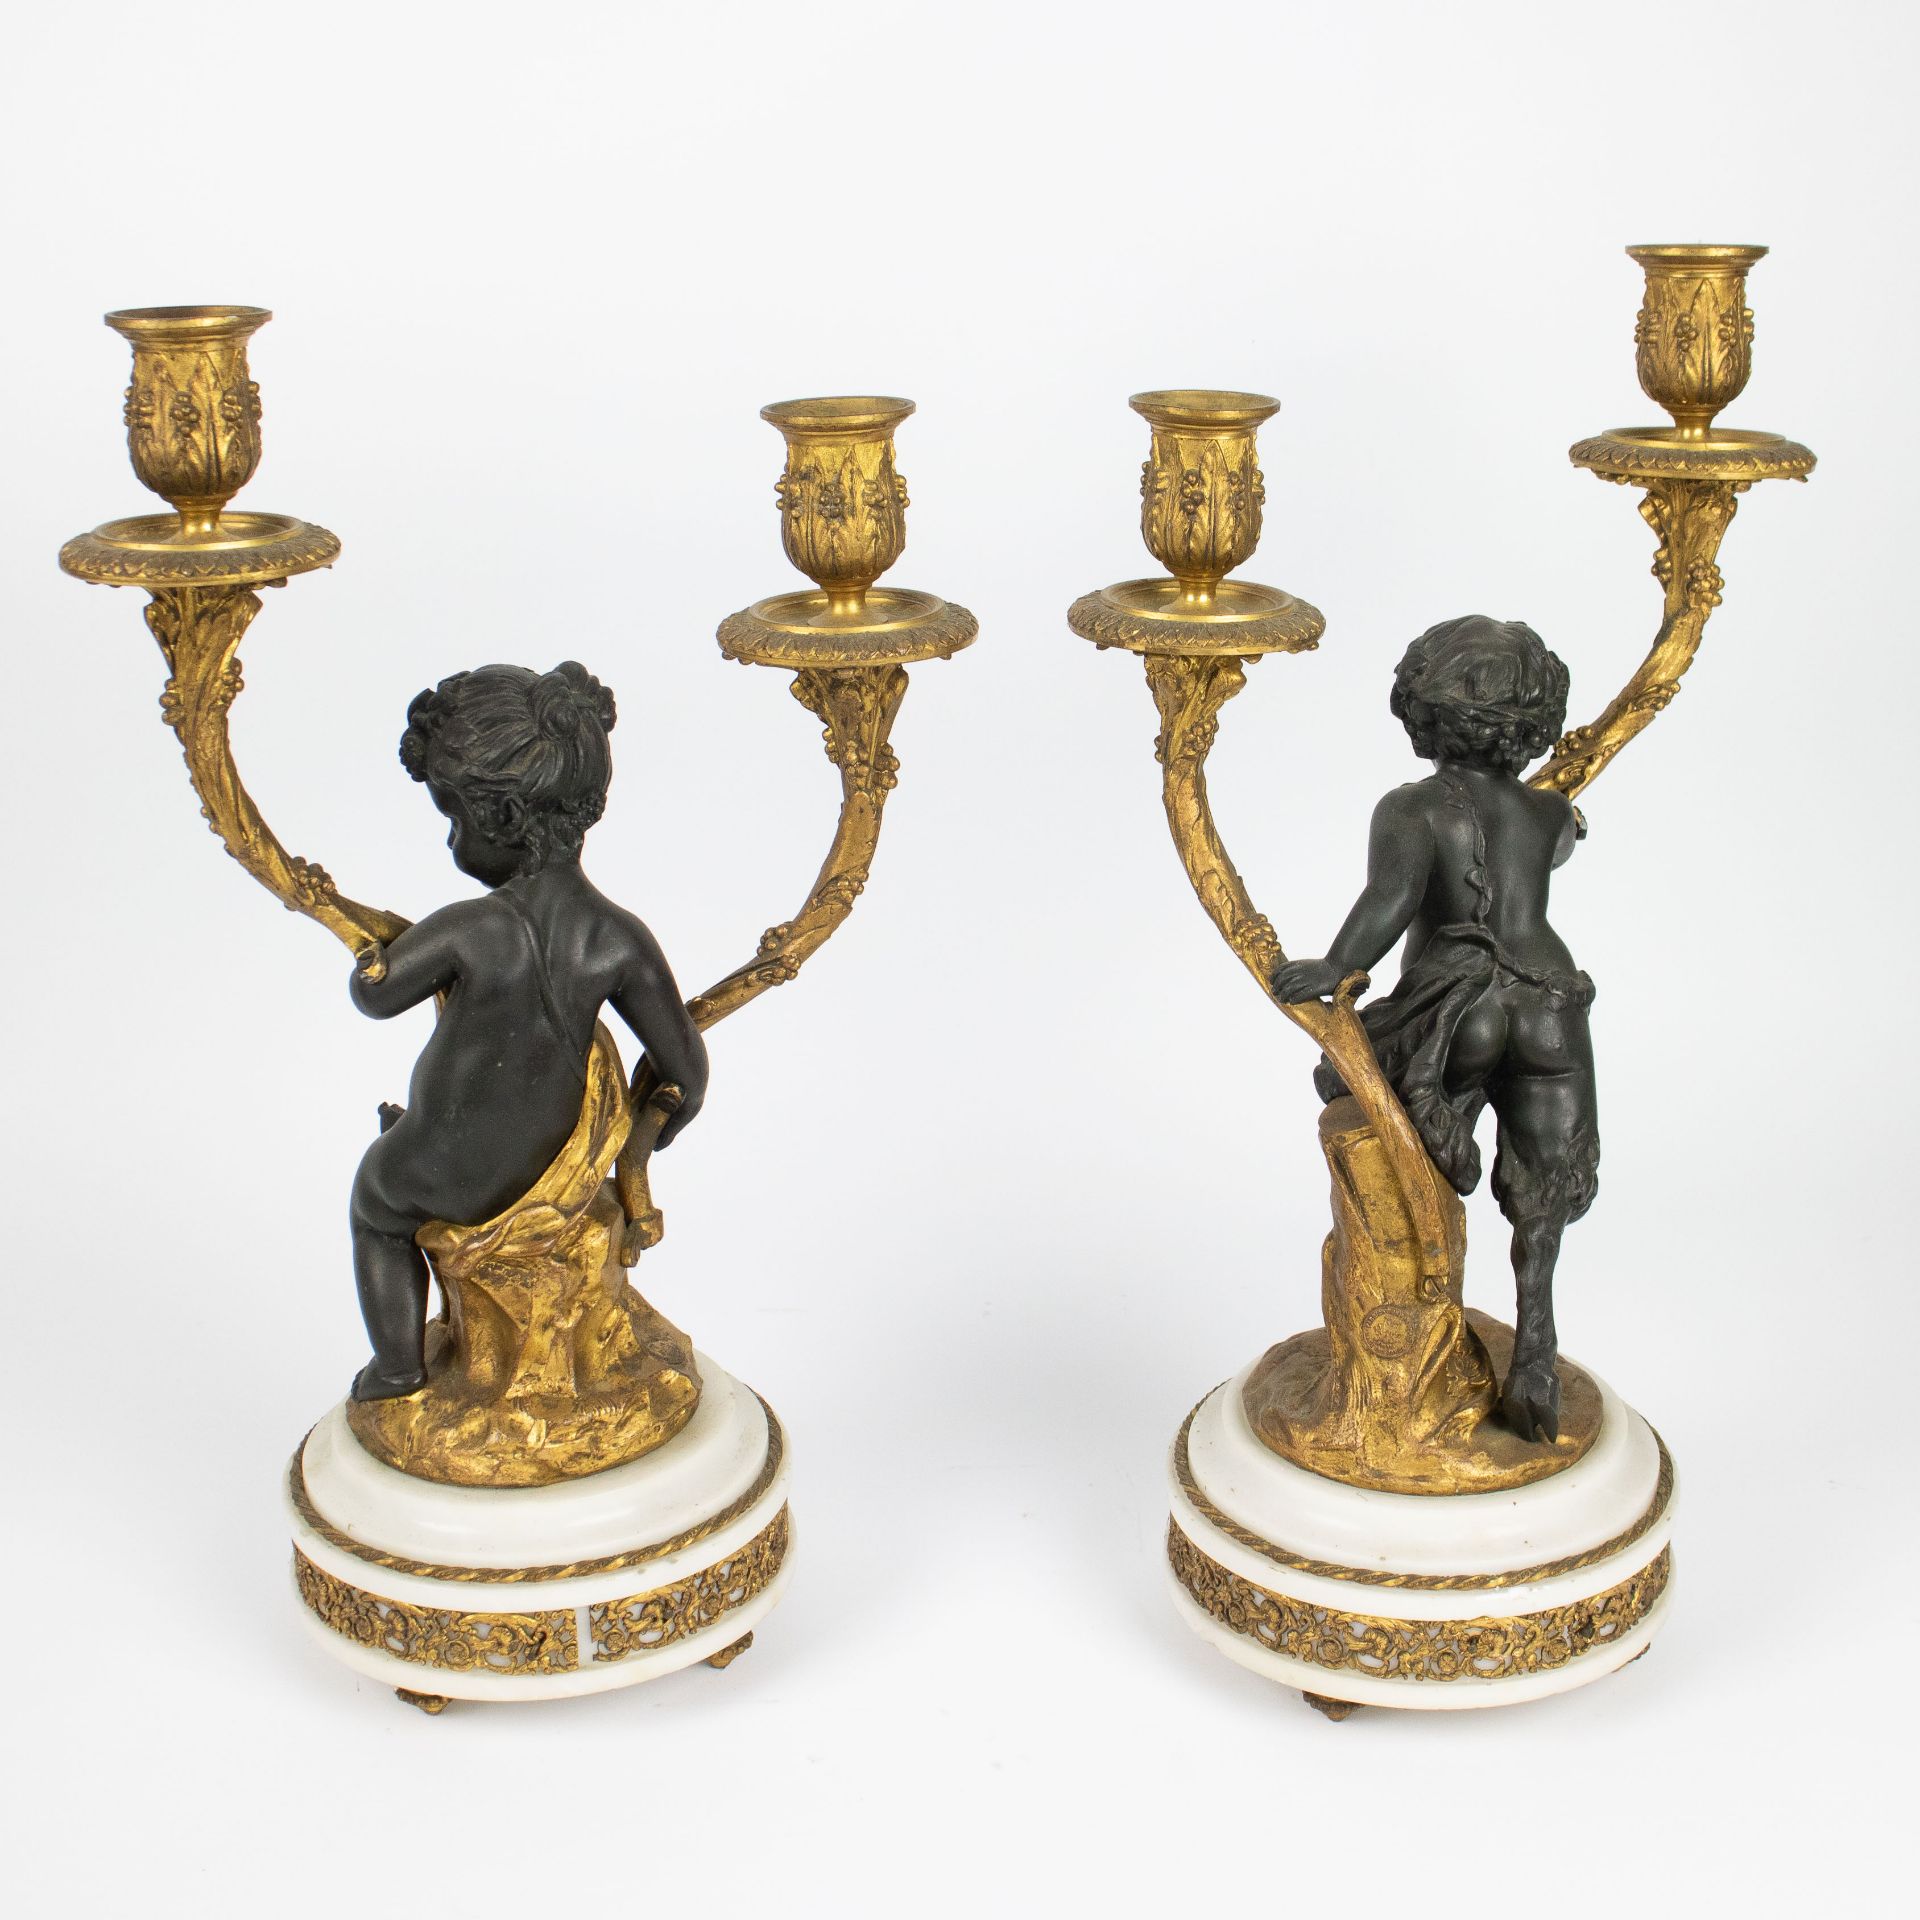 A Louis XVI style clock and candelabra in marble and bronze - Image 7 of 8